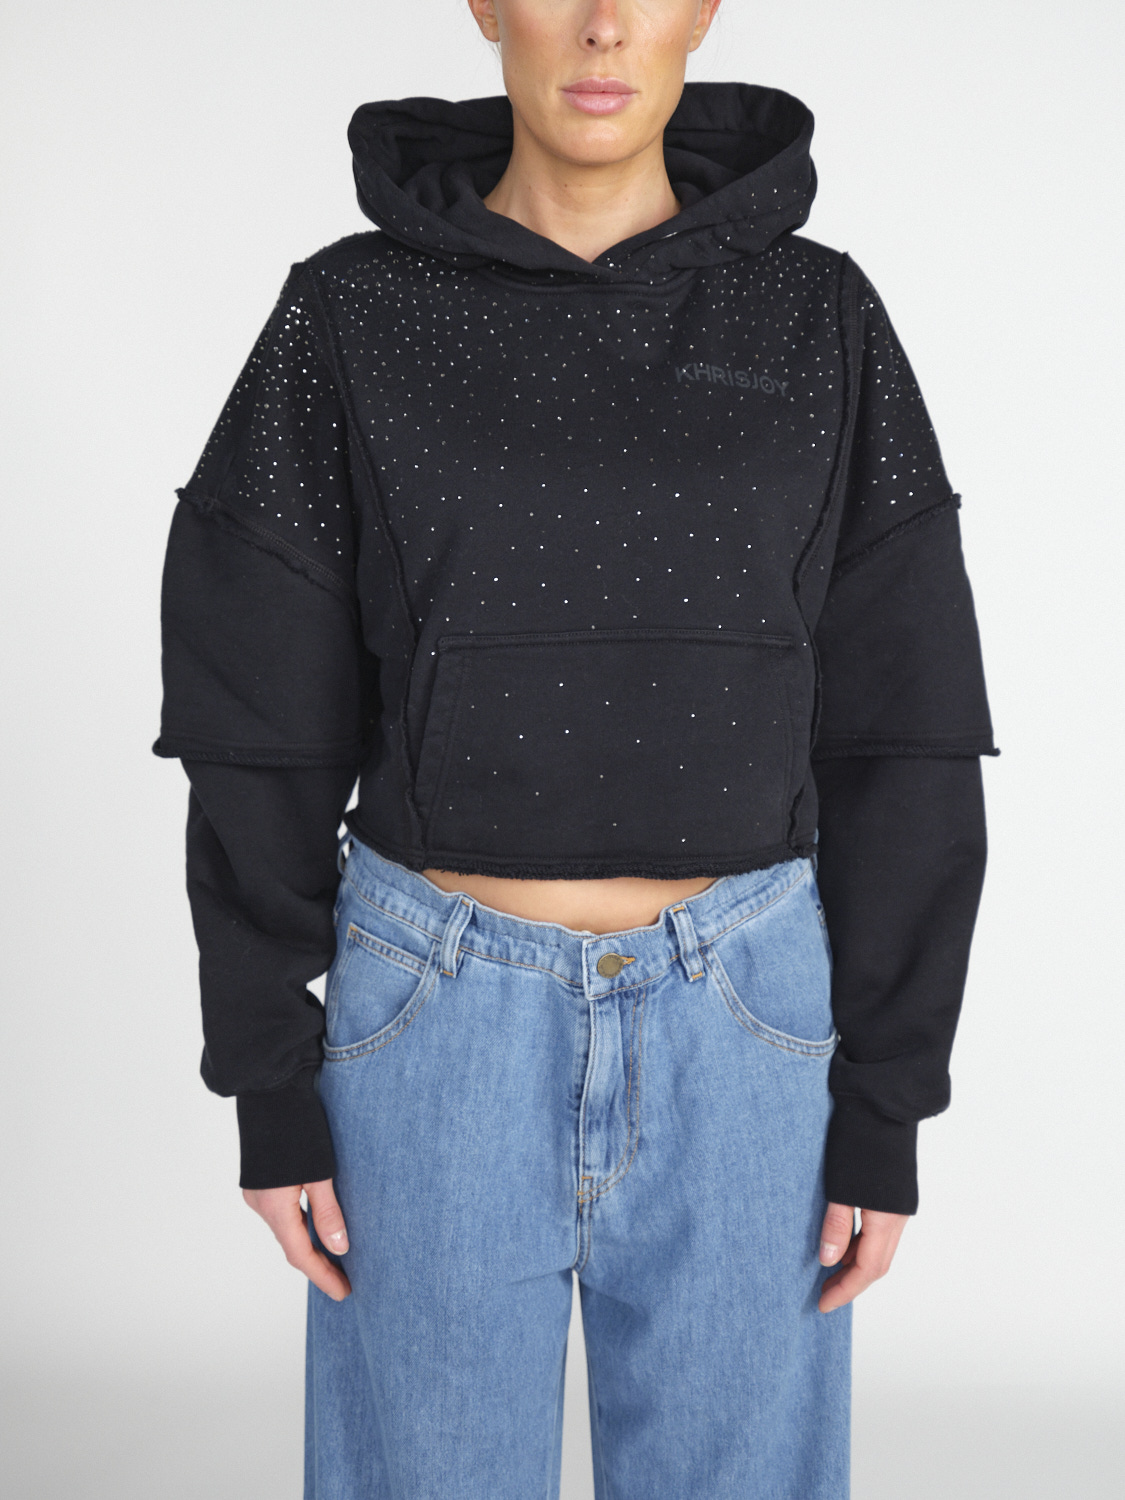 Hoodie Crop - Cropped sweater with glitter details  